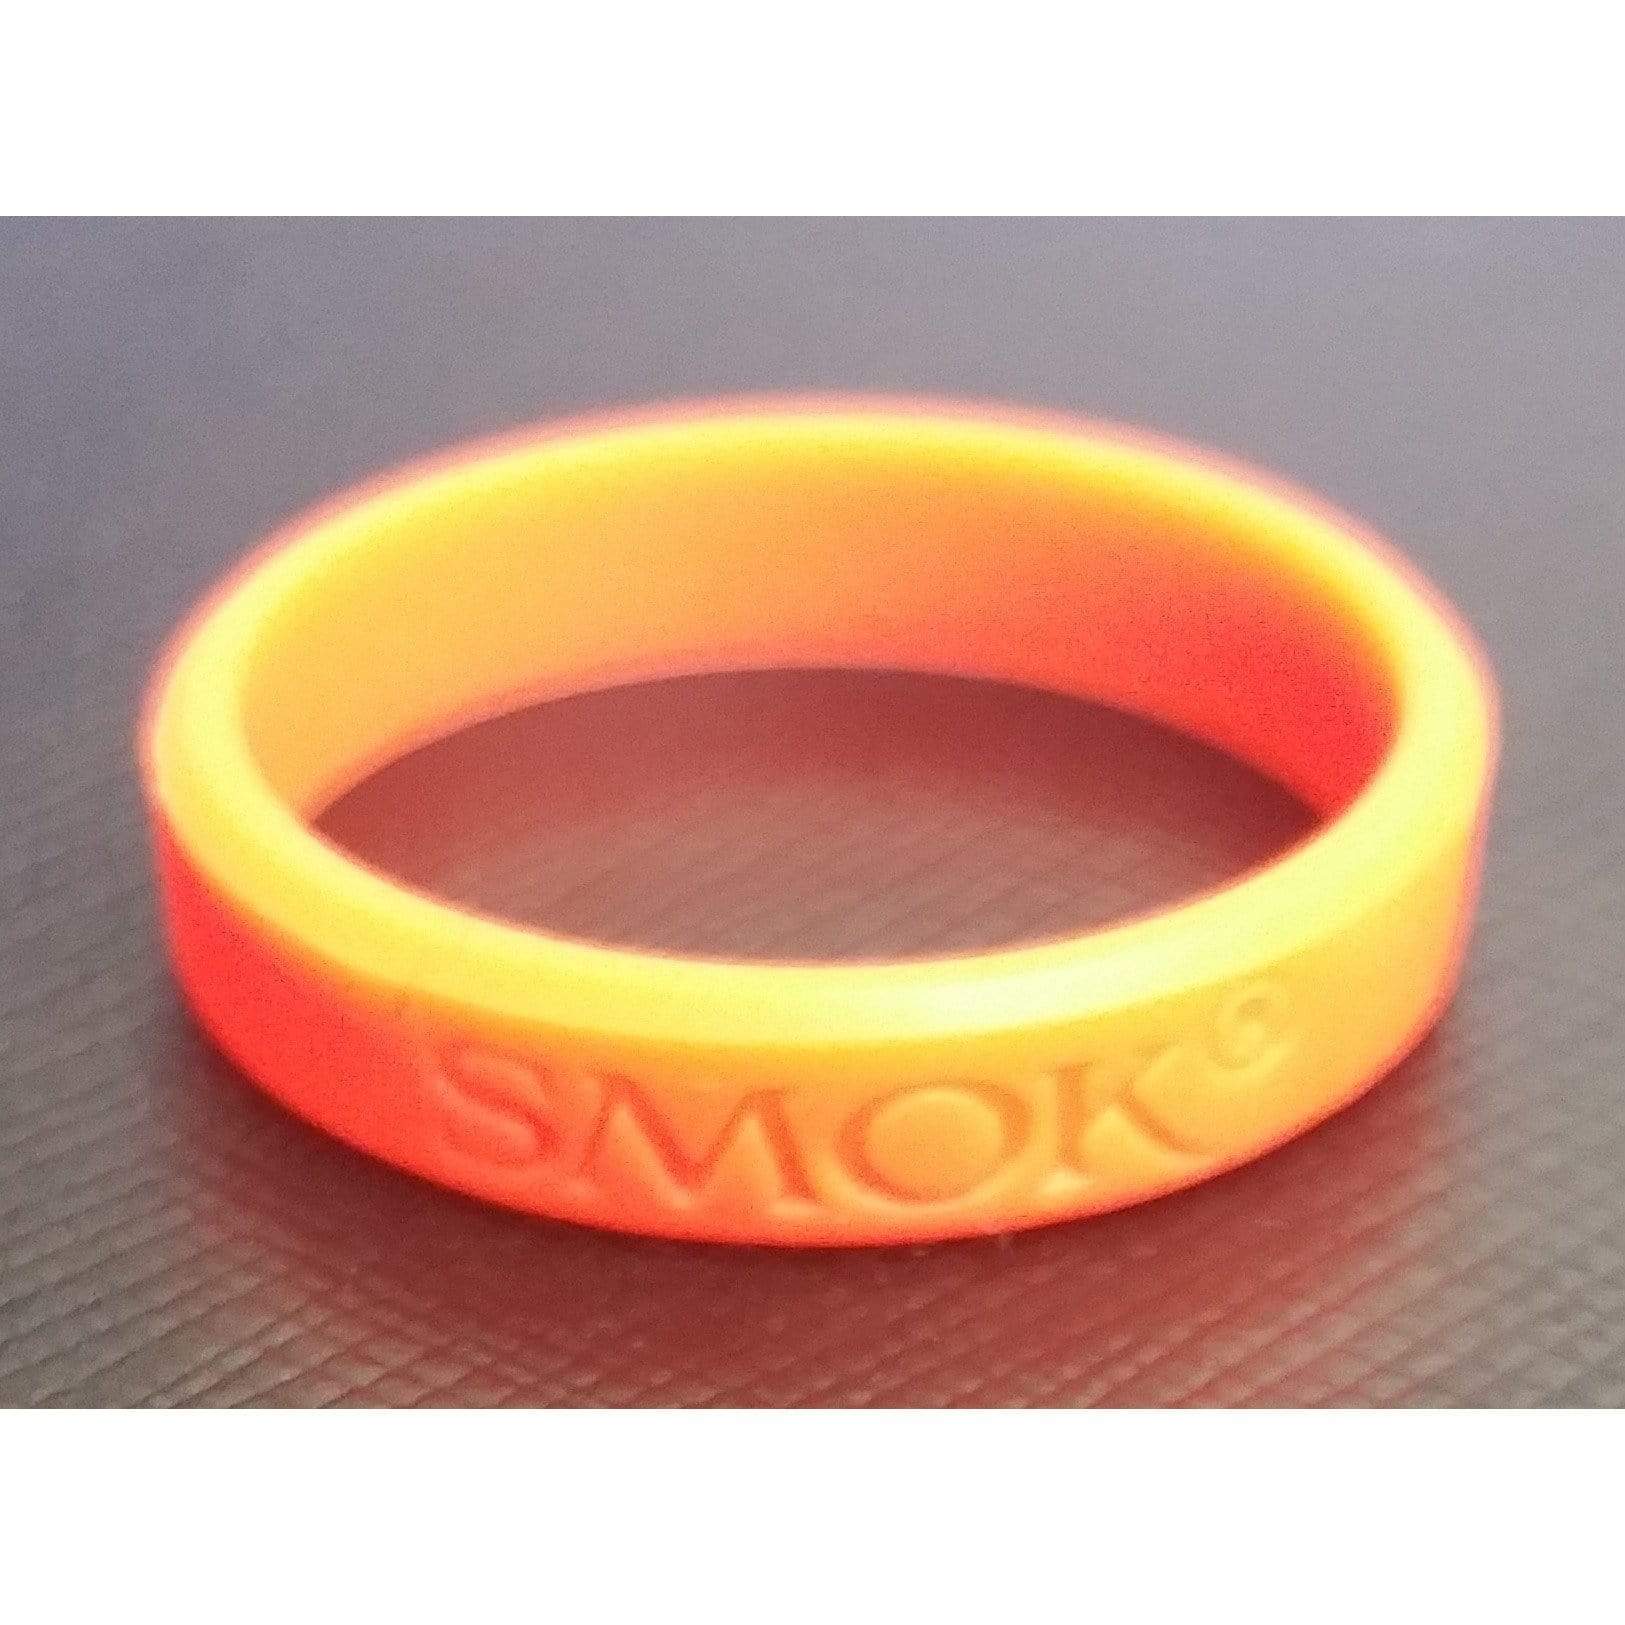 SMOK Vape Bands - Misc Accessories | Tank Bands All Day Vapes - All Day Vapes Inc